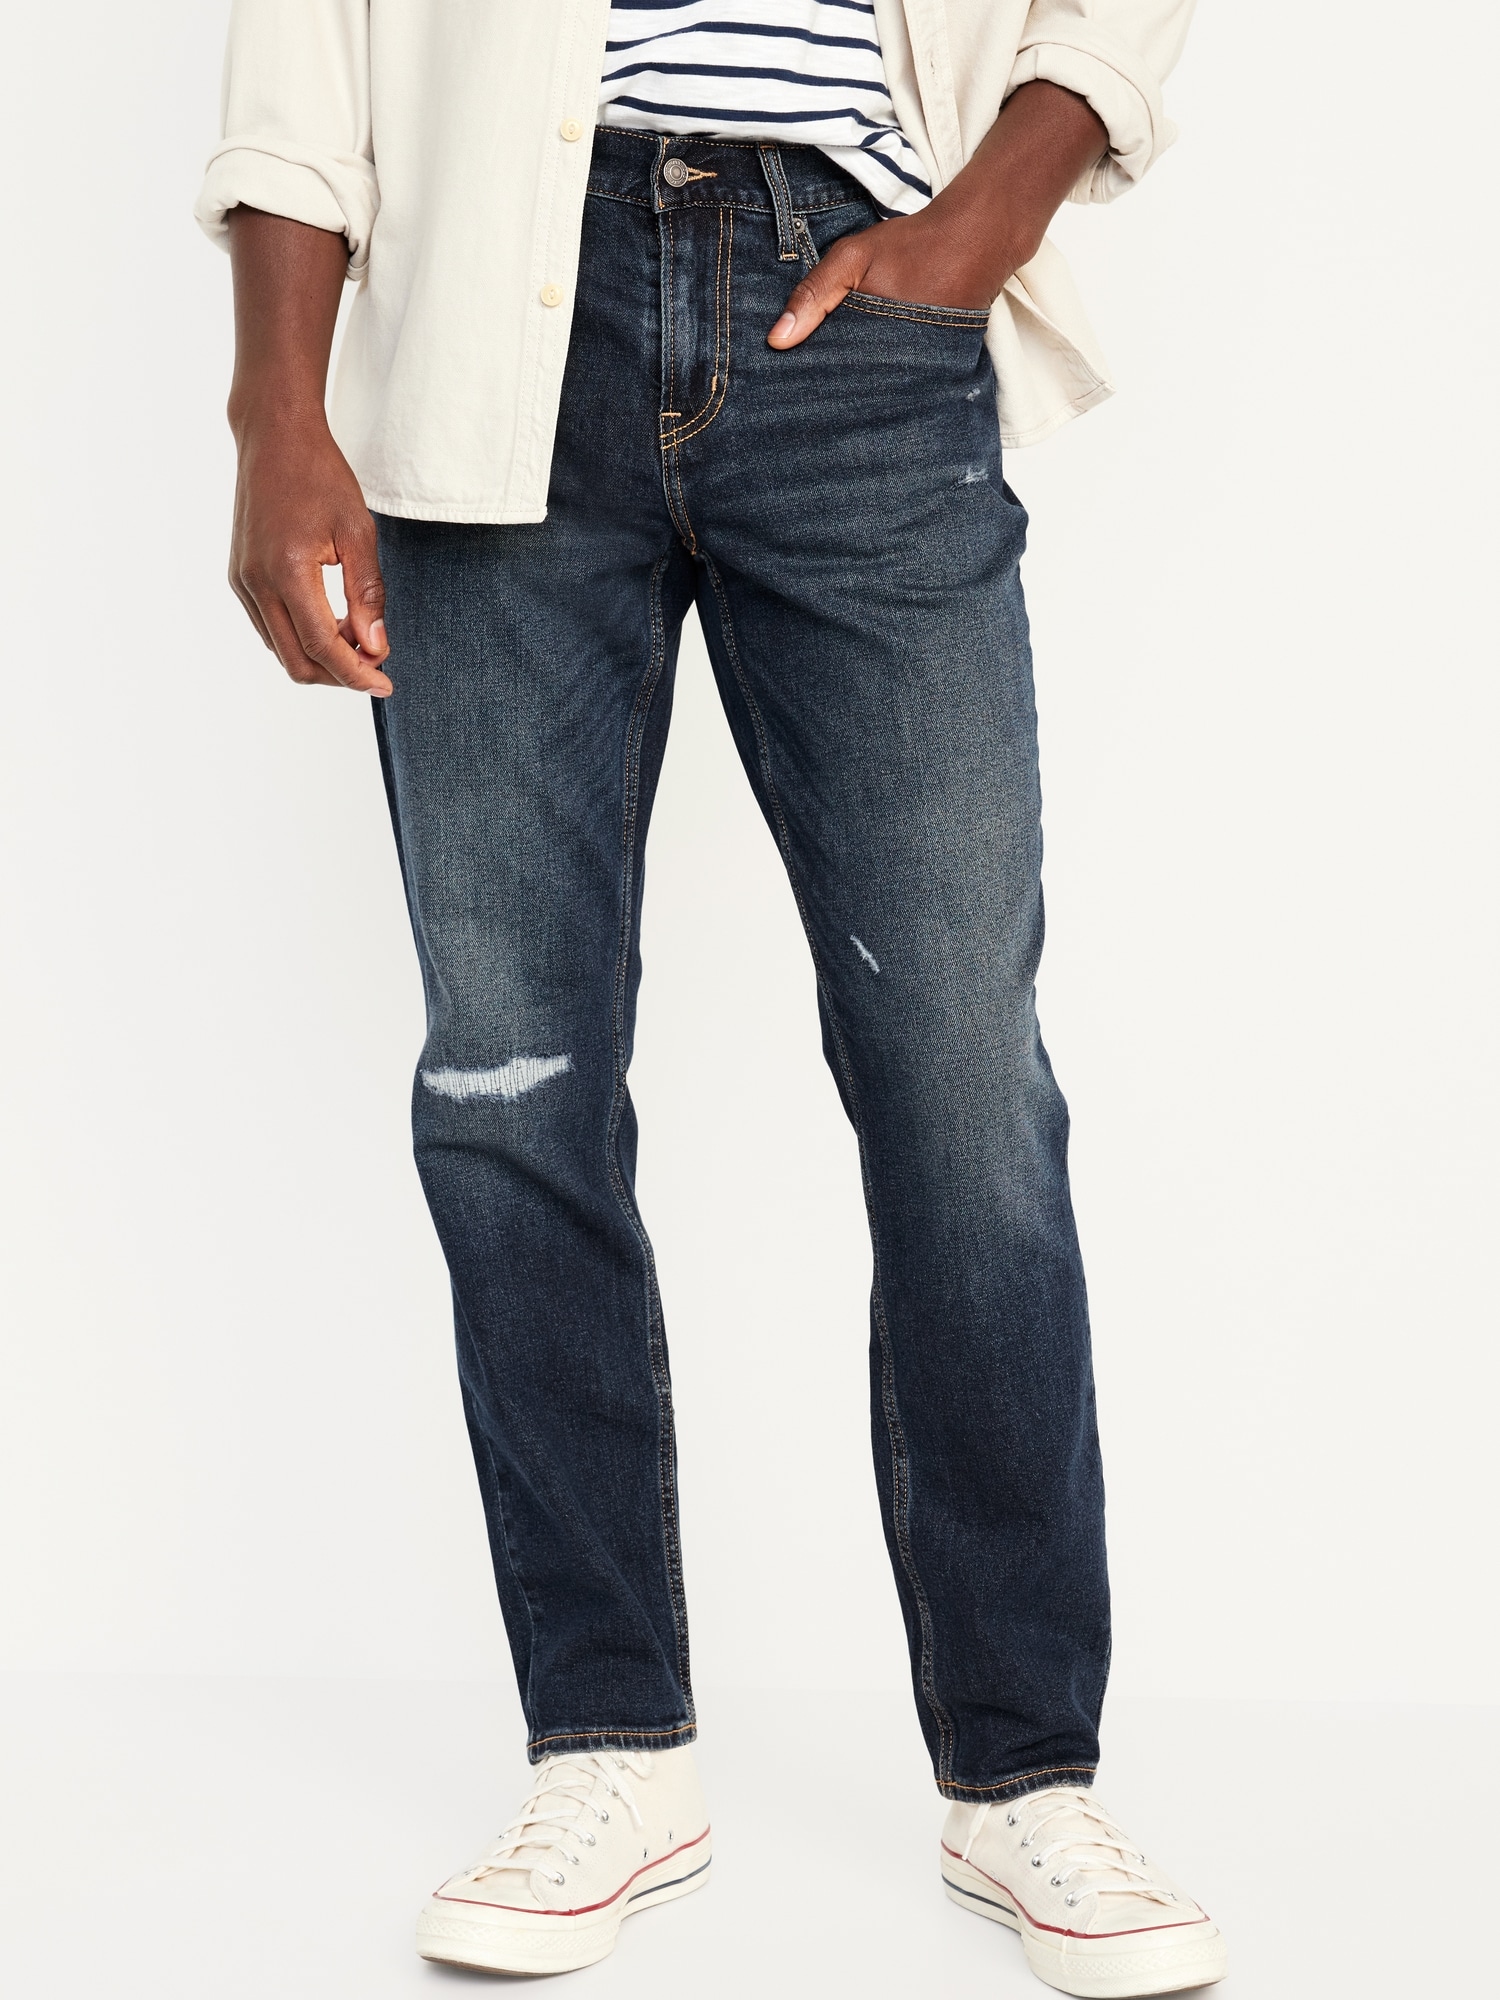 Athletic Taper Built-In Flex Ripped Jeans